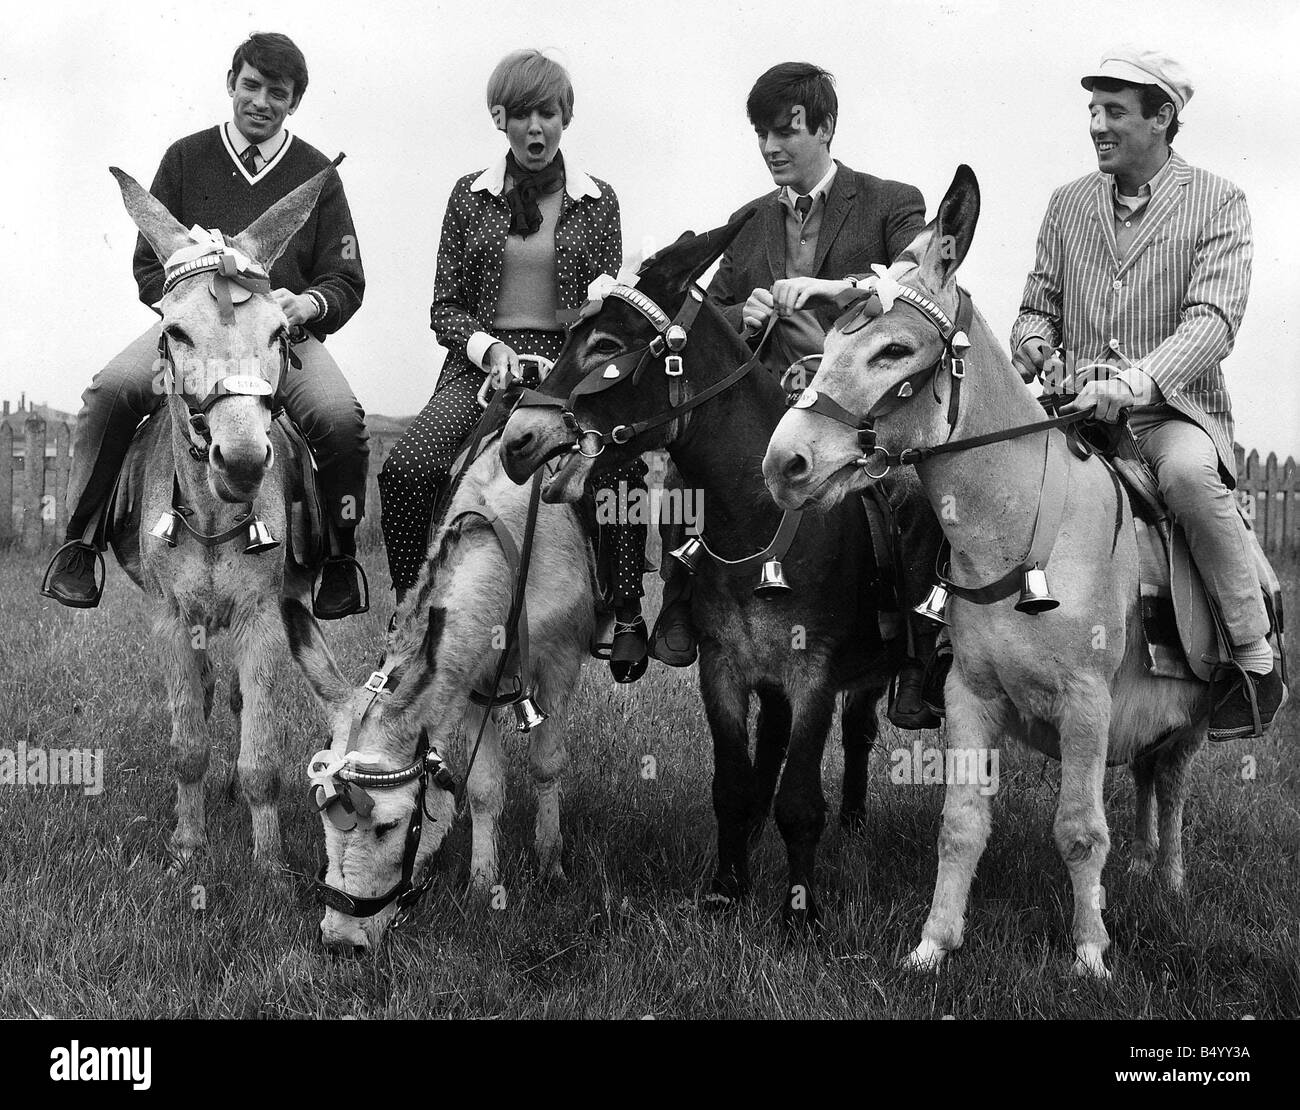 Cilla Black pop singer entertainer with The Bachelors 1966 riding on donkeys Stock Photo